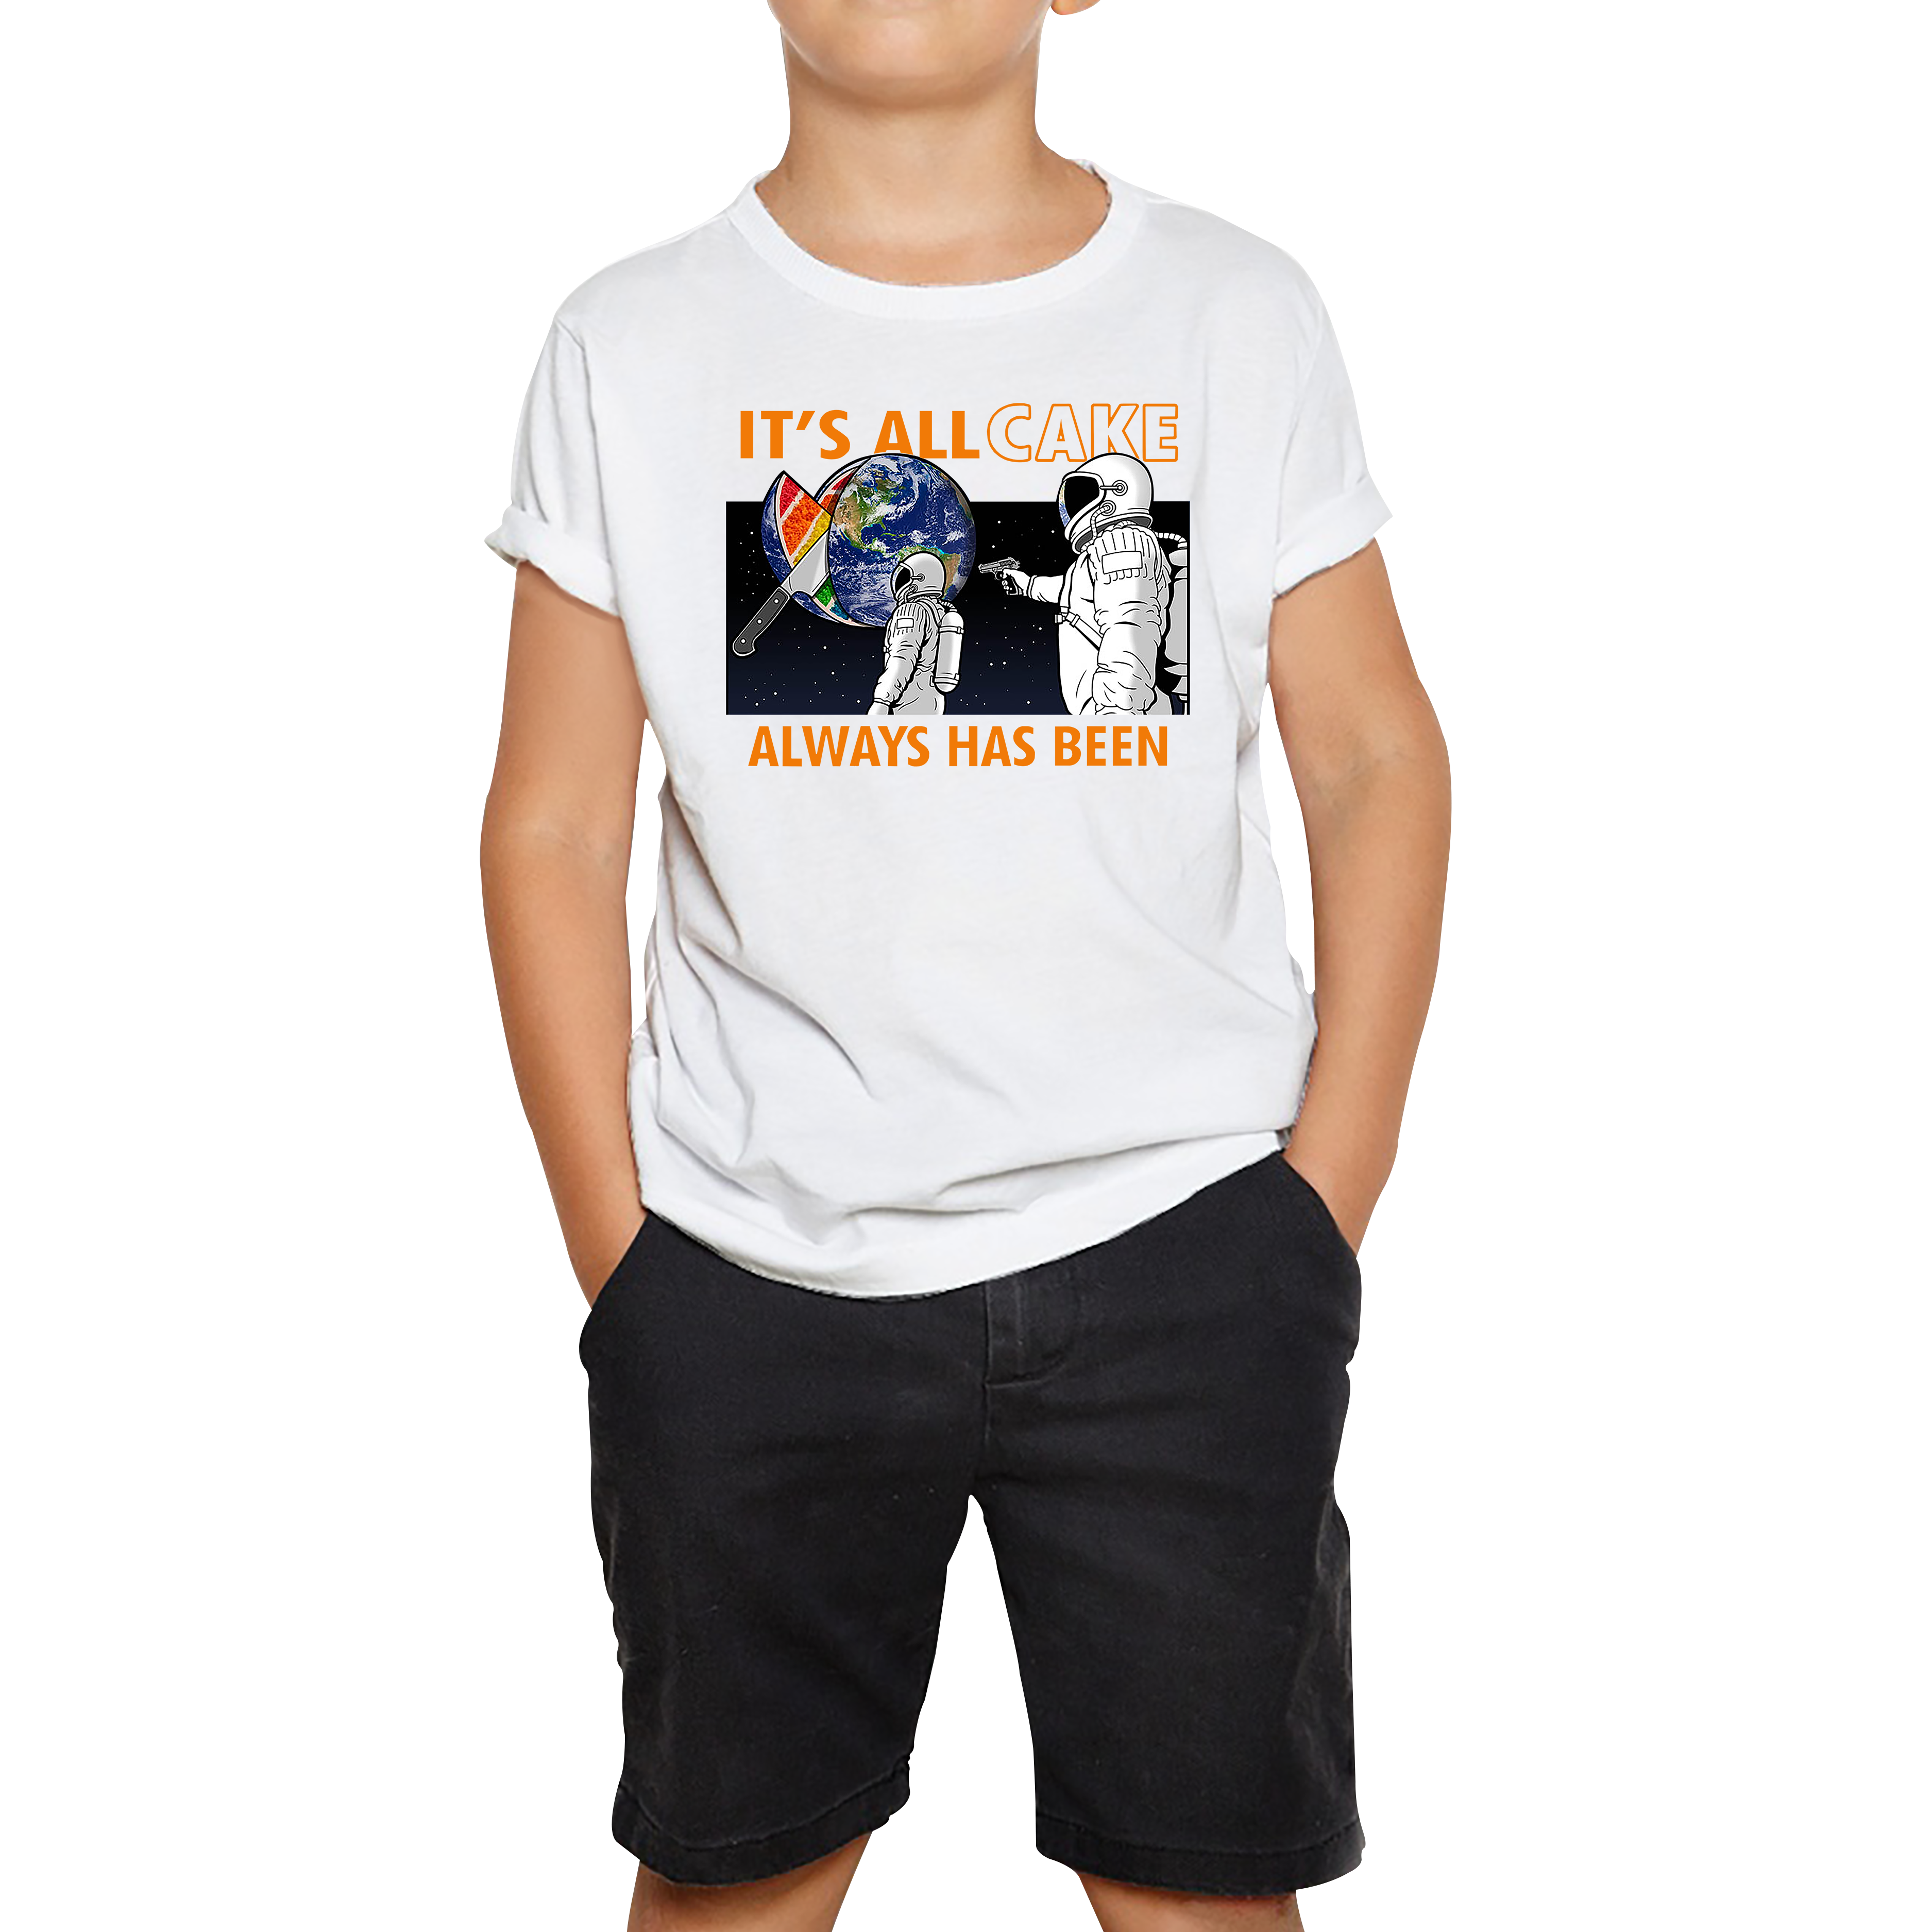 It's All Cake (Always Has Been) Astronaut Space Picture Funny Saying Novelty Meme Kids T Shirt